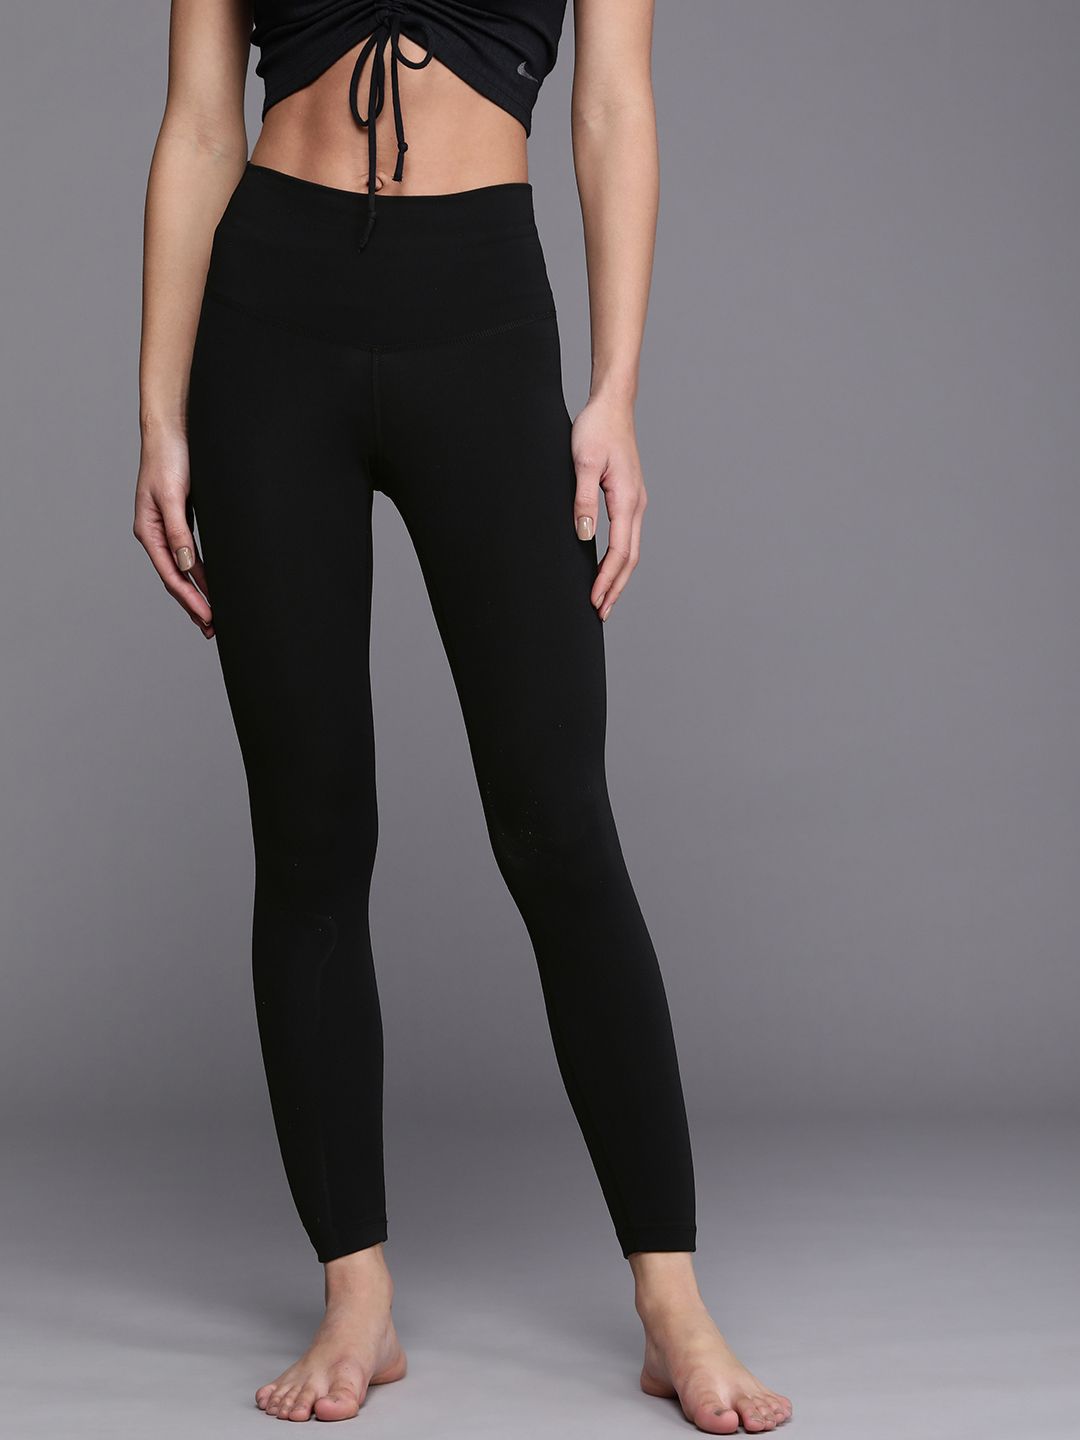 Nike Women Black Solid High-Rise 7/8 Dri-FIT Yoga Tights Price in India